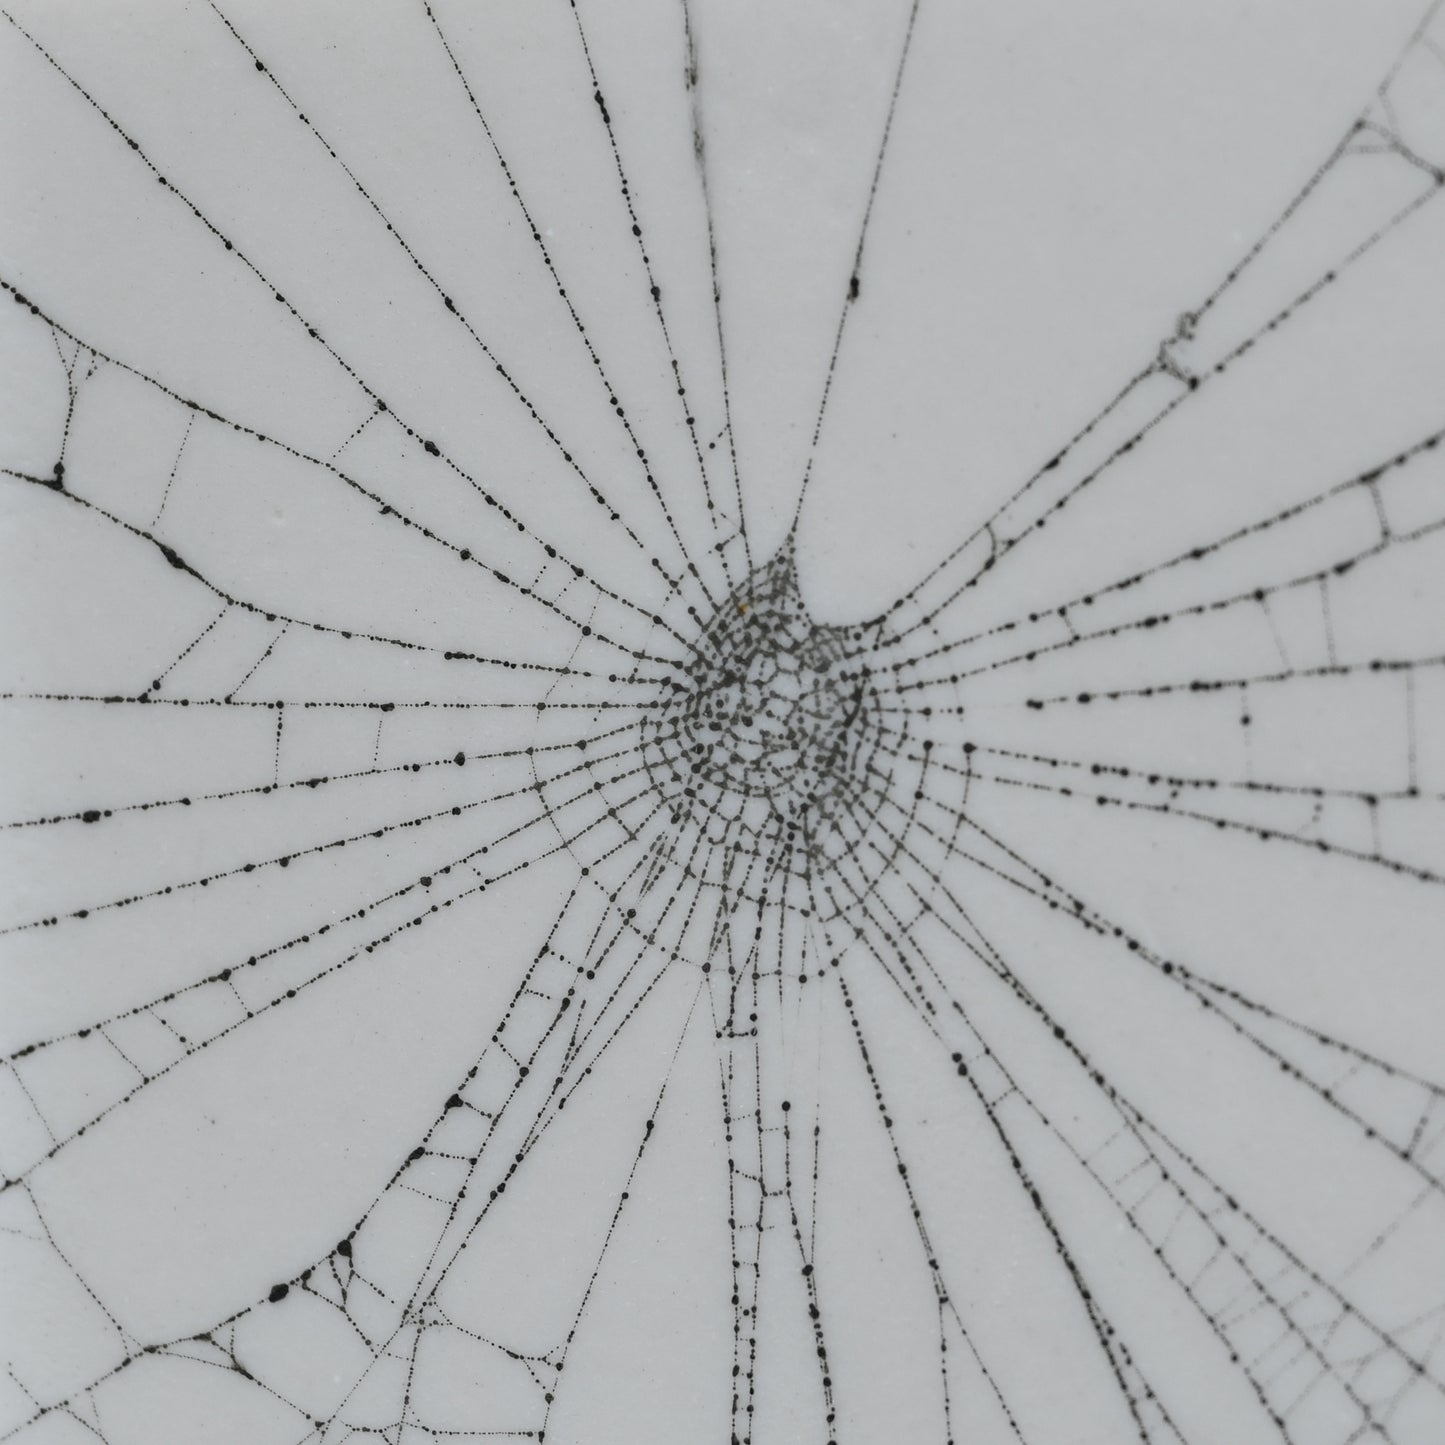 Web on Clay (145), Collected August 25, 2022